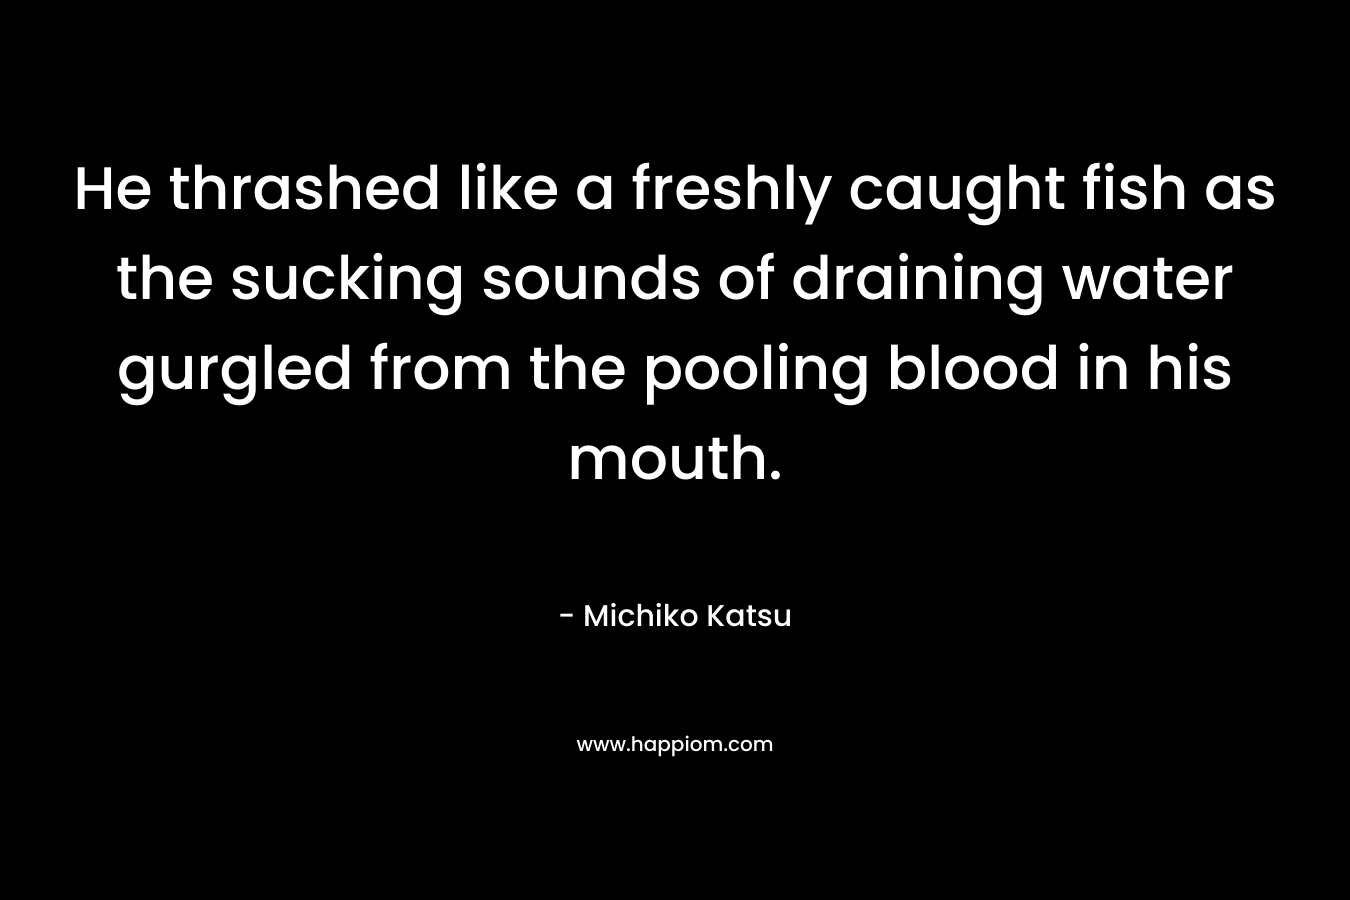 He thrashed like a freshly caught fish as the sucking sounds of draining water gurgled from the pooling blood in his mouth. – Michiko Katsu